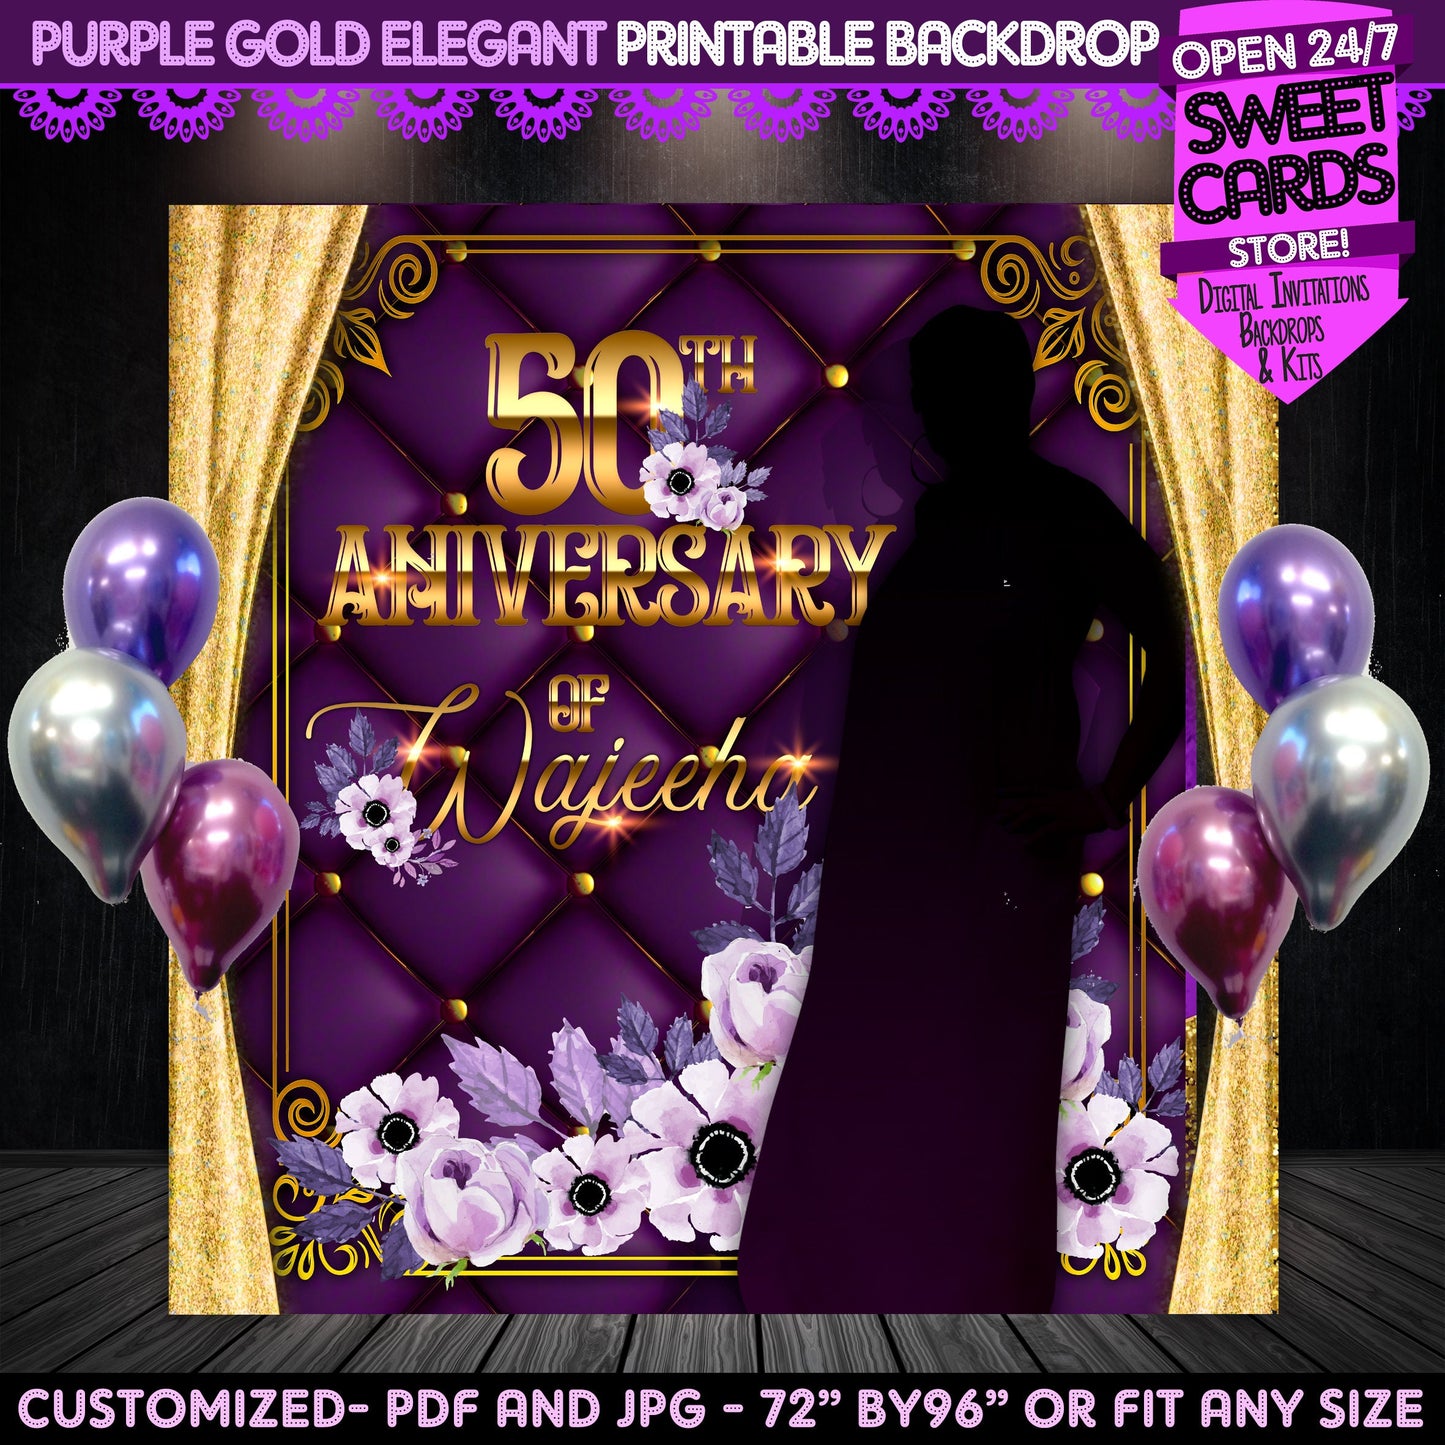 Purple and Gold Printable Backdrop, 50th aniversary backdrop, Elegant gold purple backdrop, Prom Backdrop, Purple Birthday Backdrop, Gold